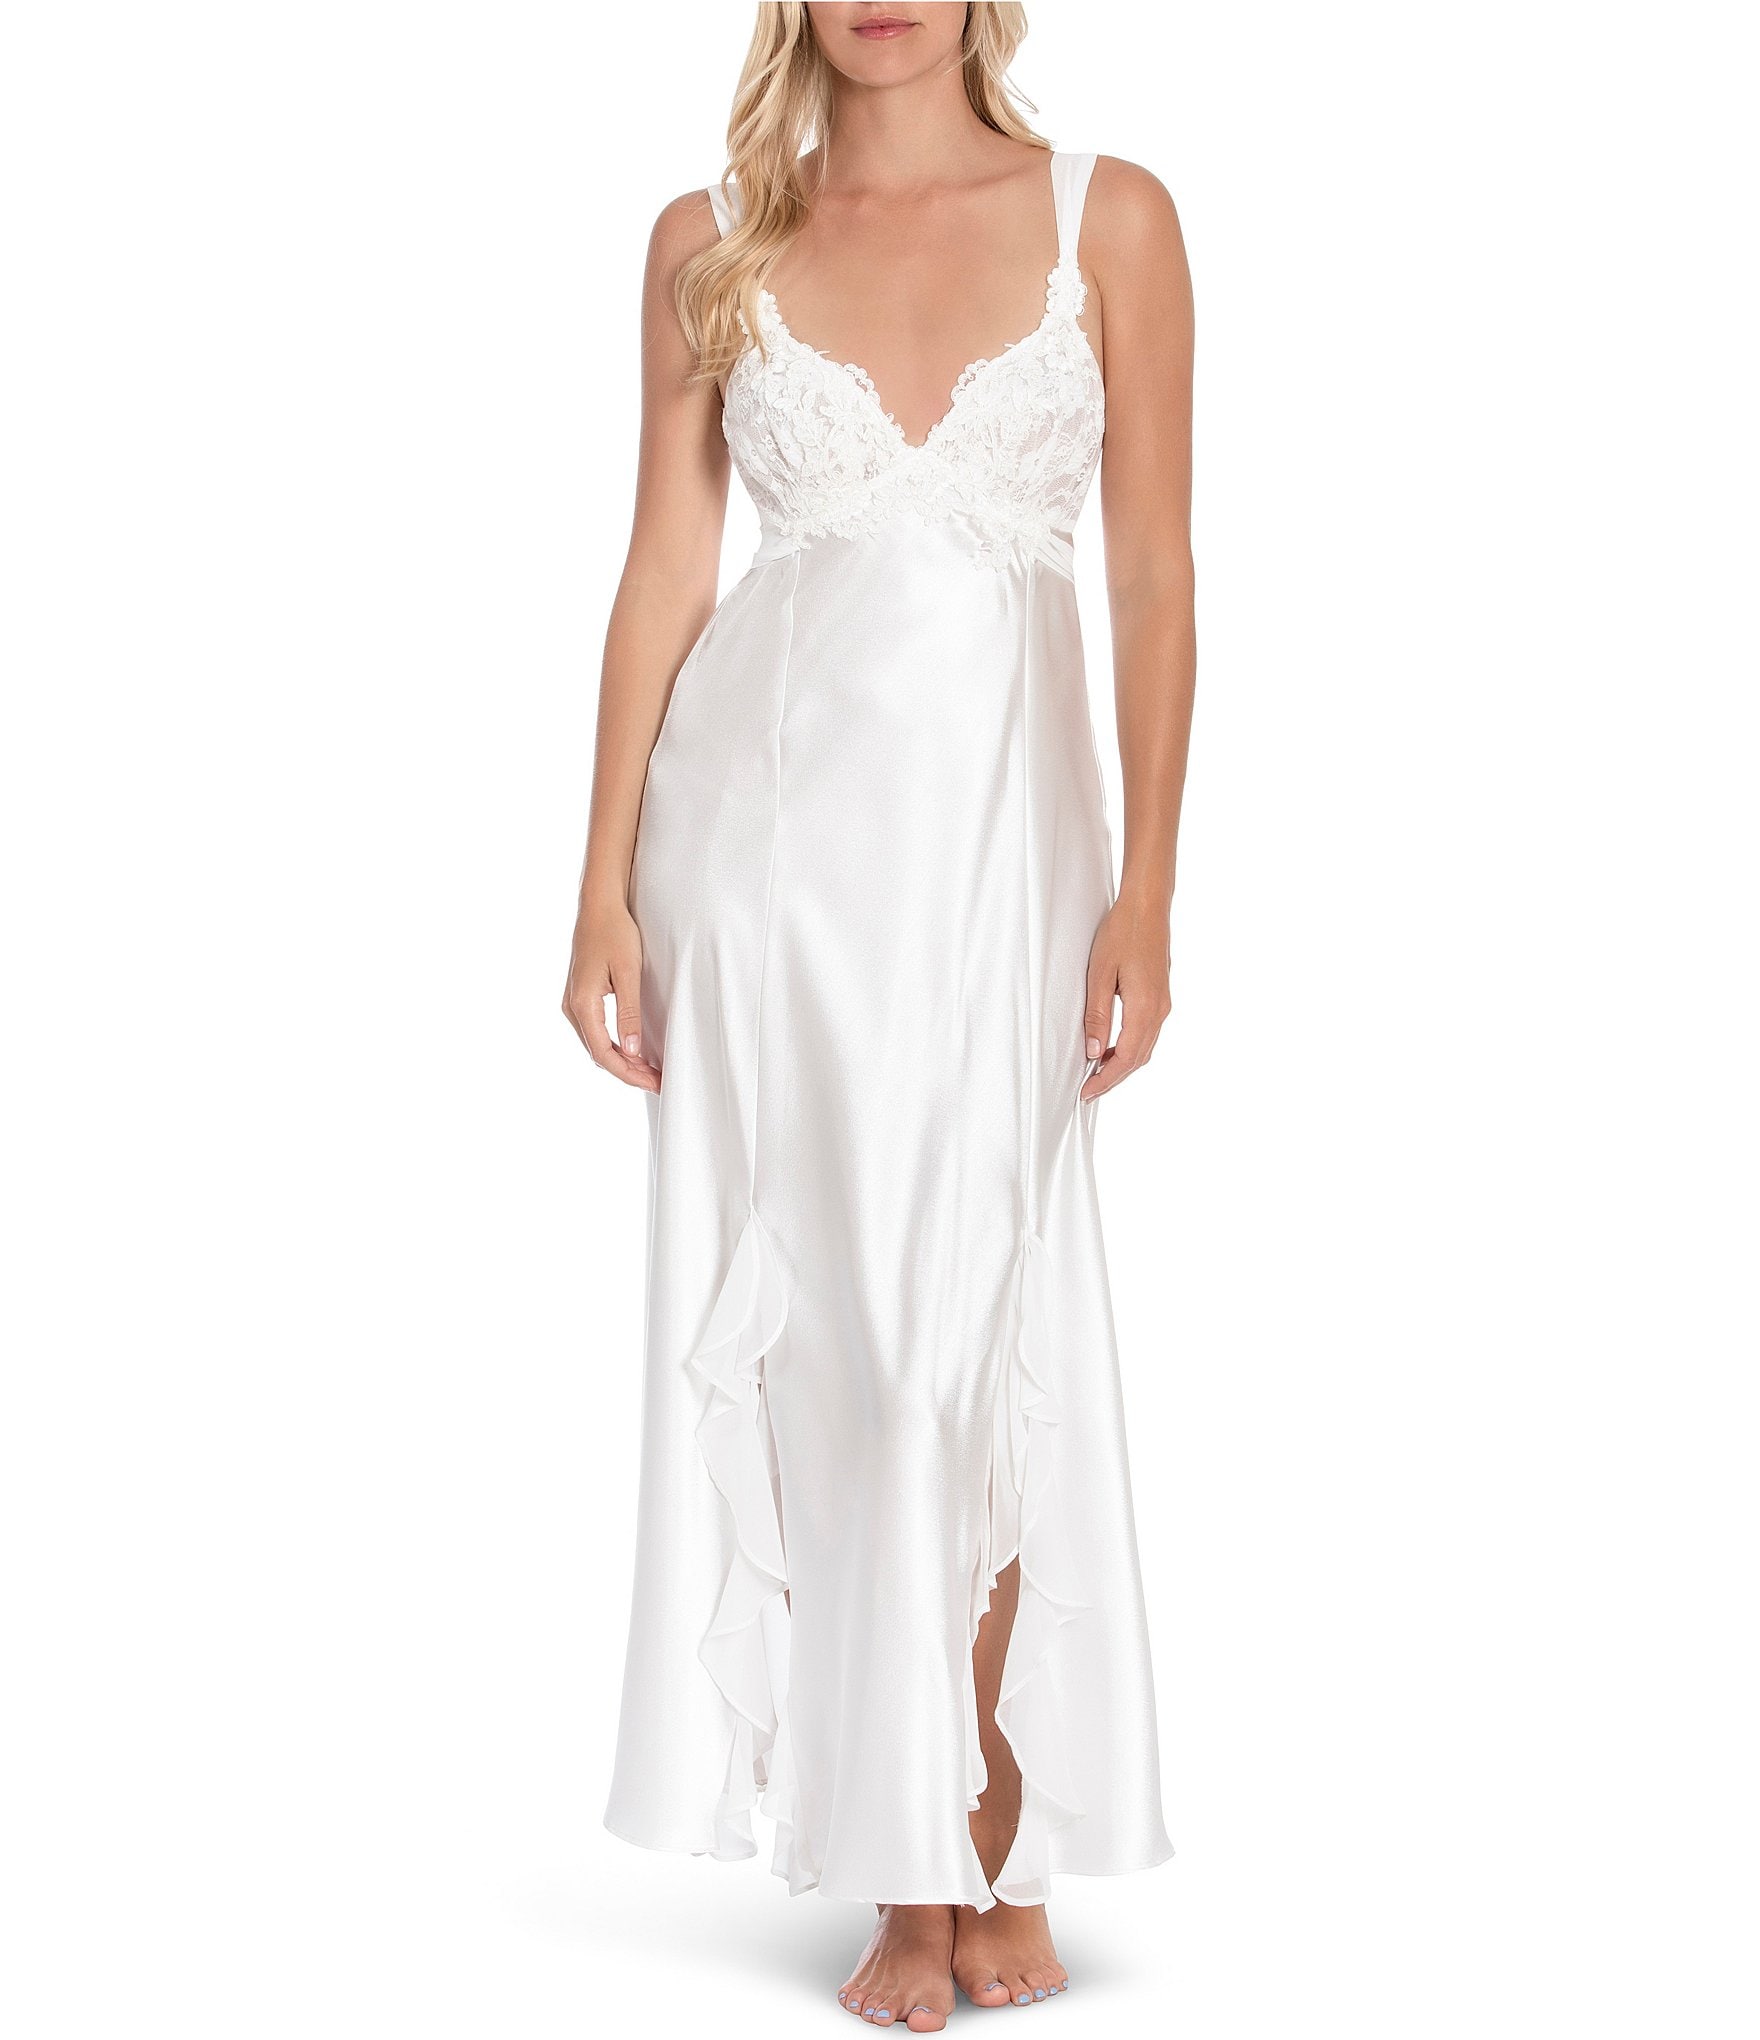 In Bloom by Jonquil Satin & Lace Long Nightgown